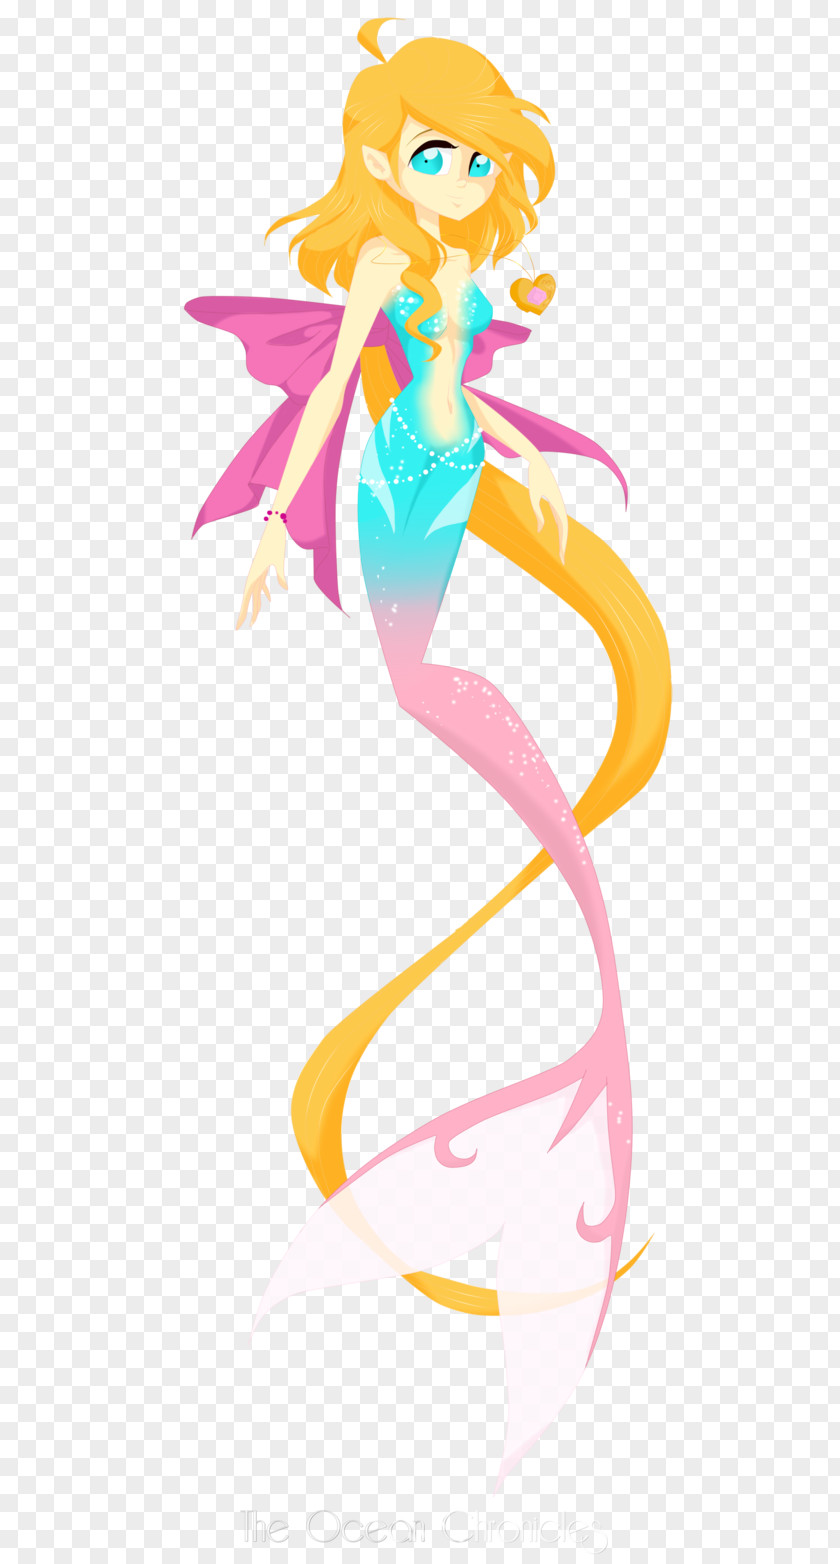 Mermaid Clothing Accessories Fashion Clip Art PNG